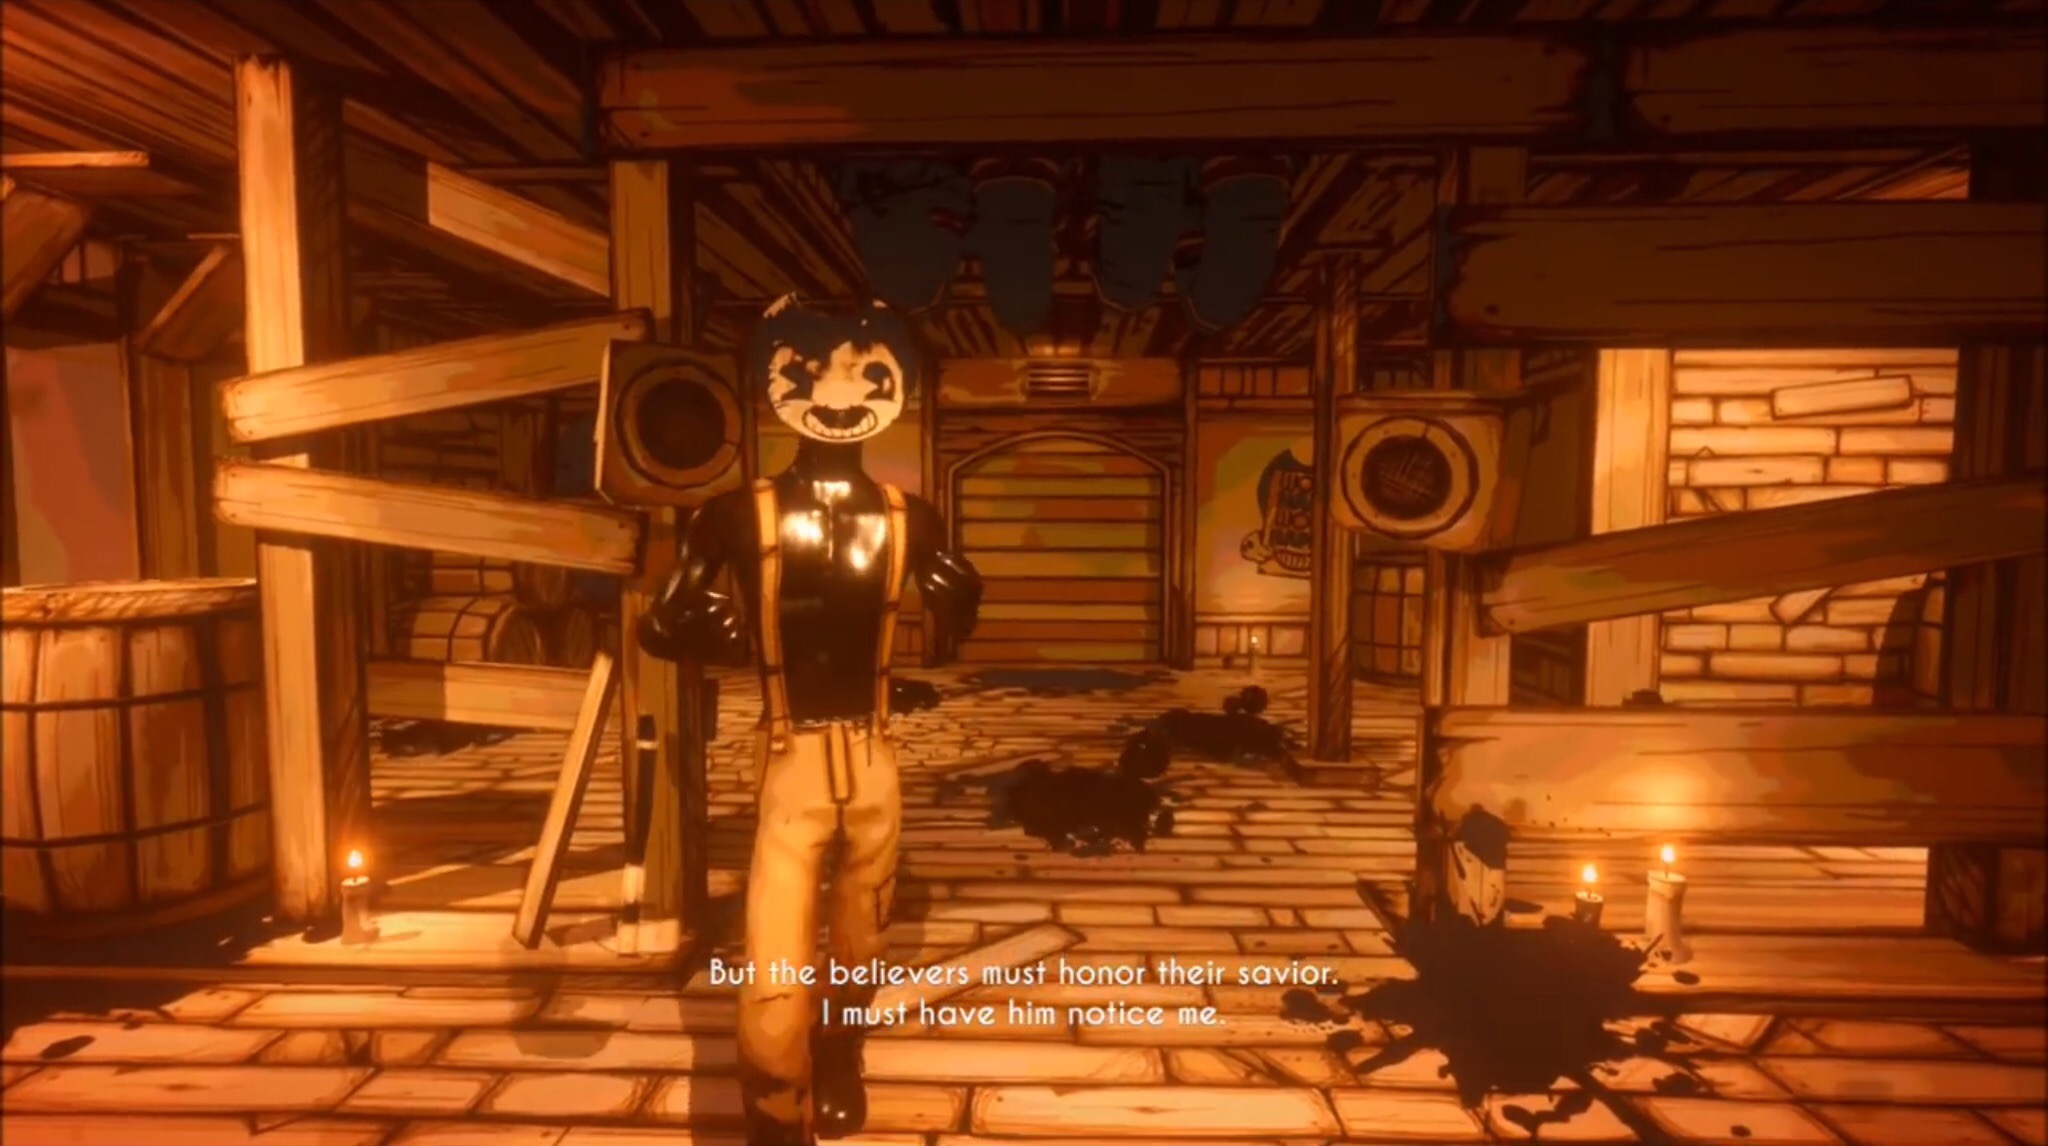 Guide Bendy and The Ink Machine Chapter 4 APK Download for Windows